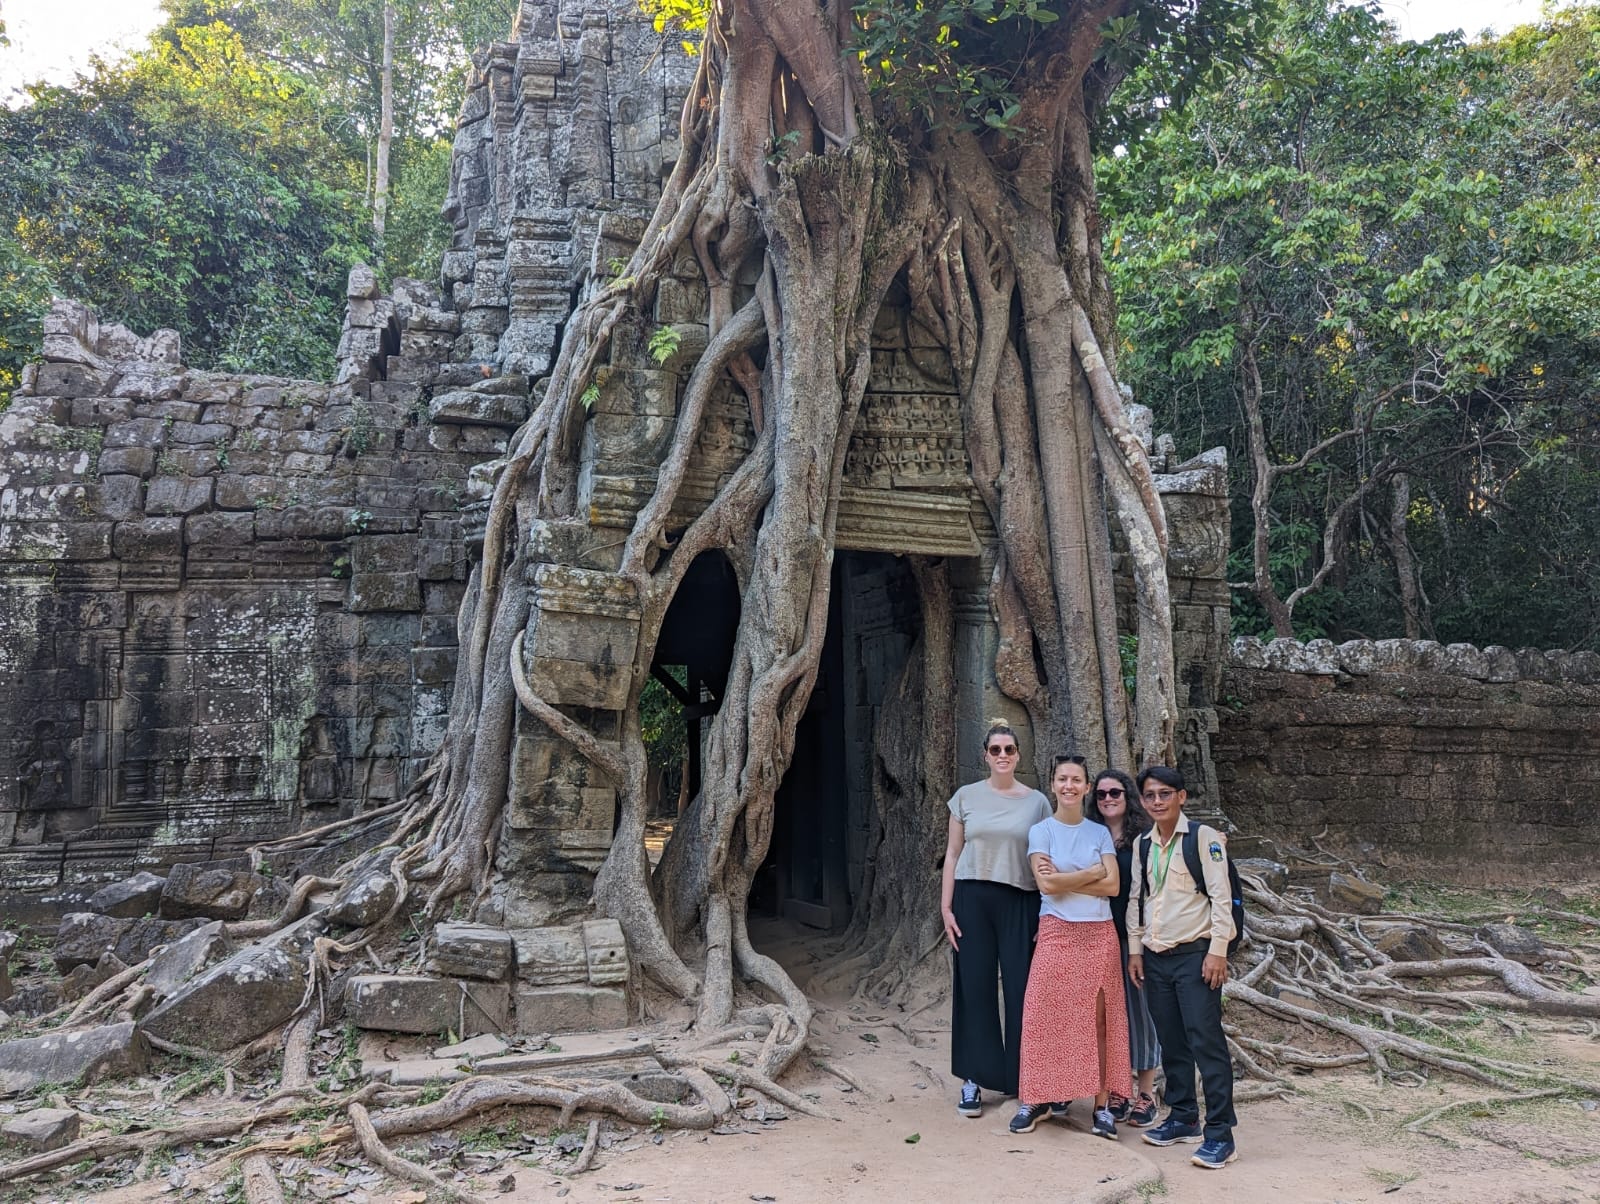 Guided tour of the Temples of Angkor